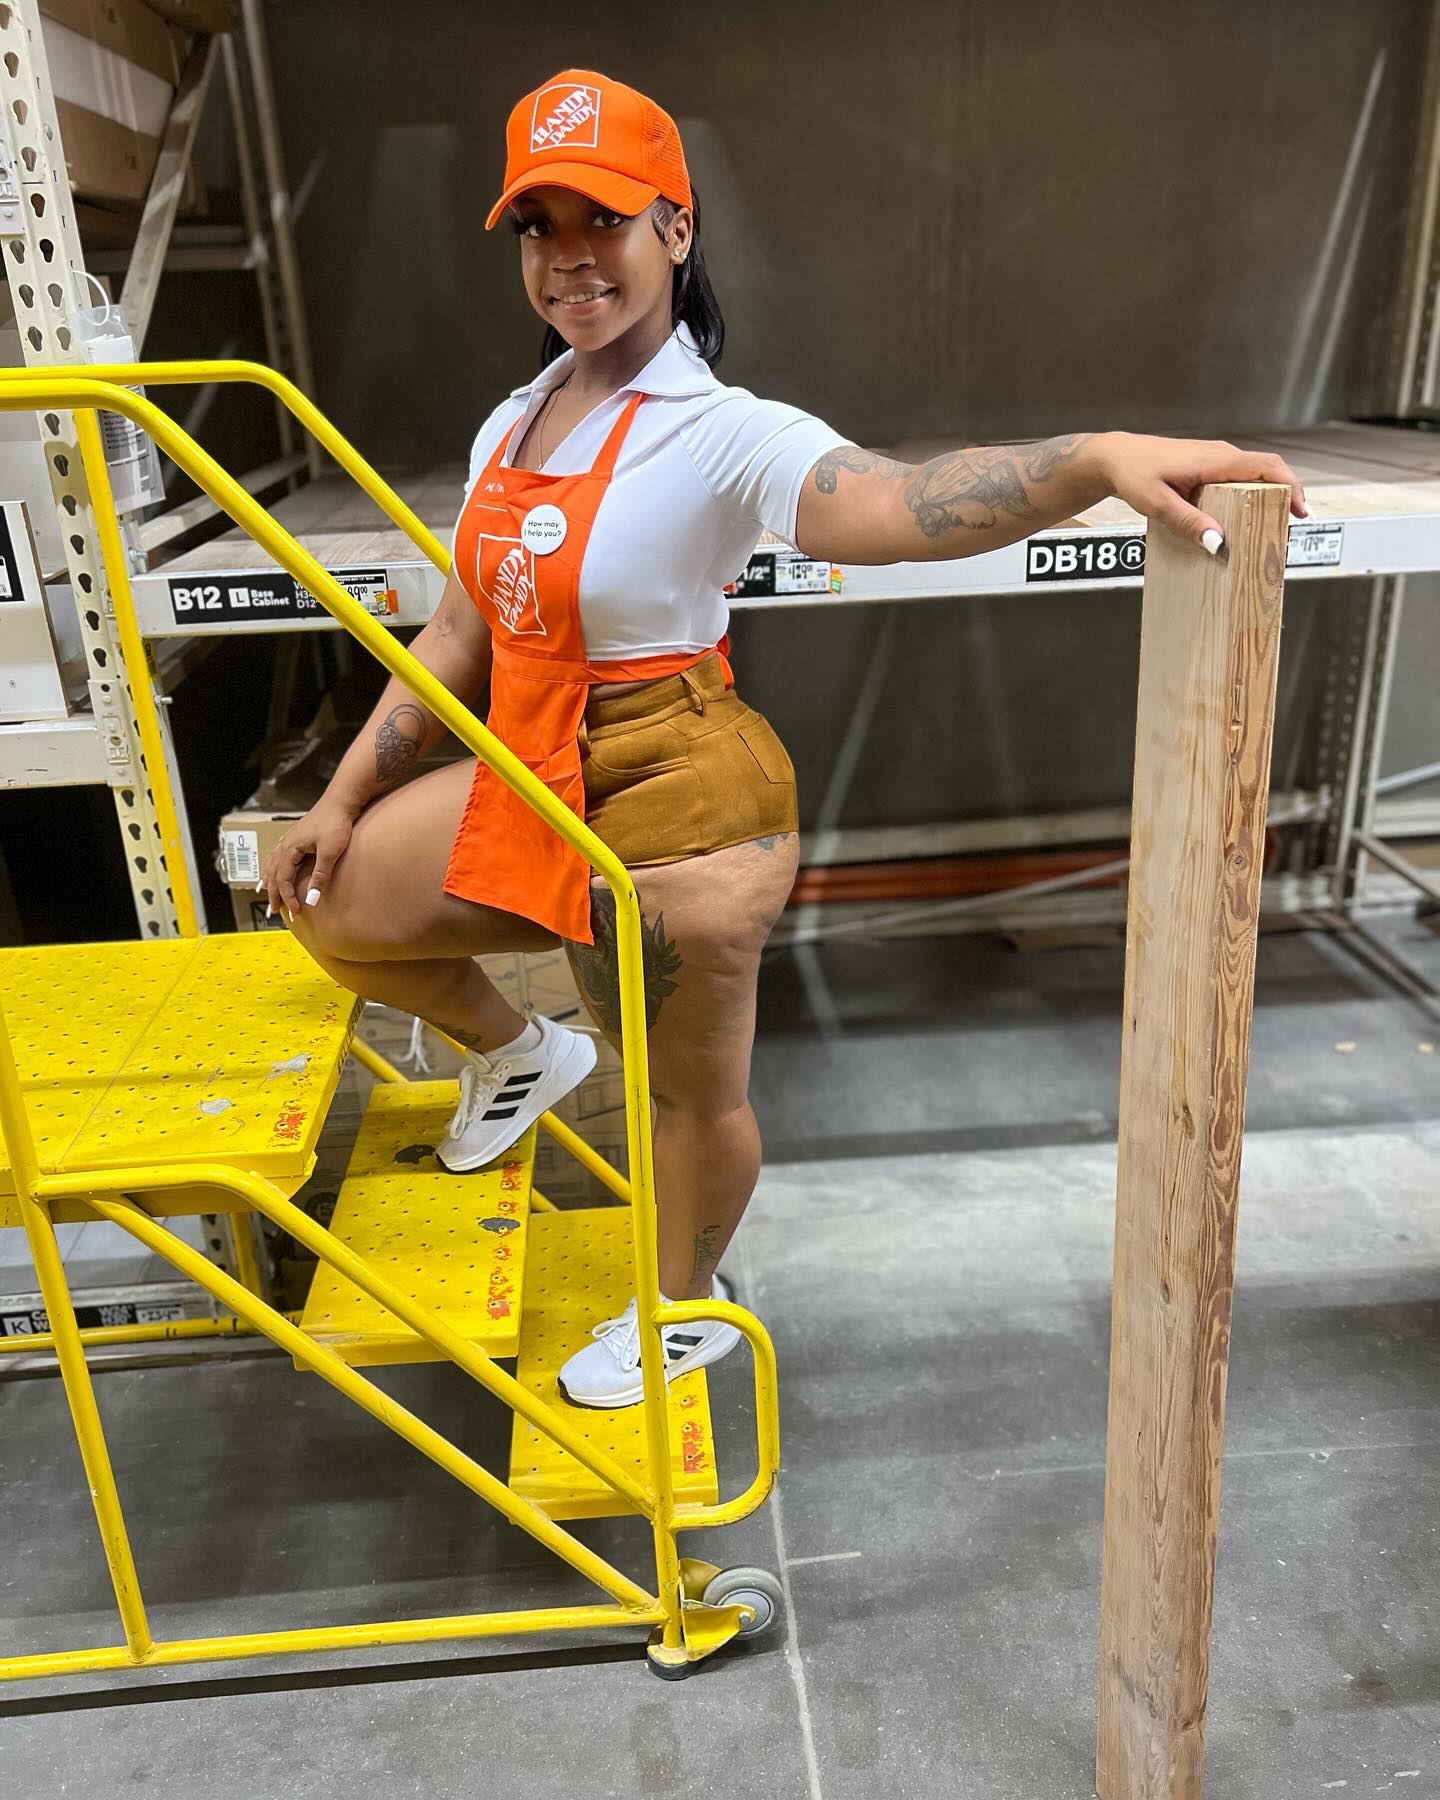 I quit onlyfans to work at home depot 🤣🥰…